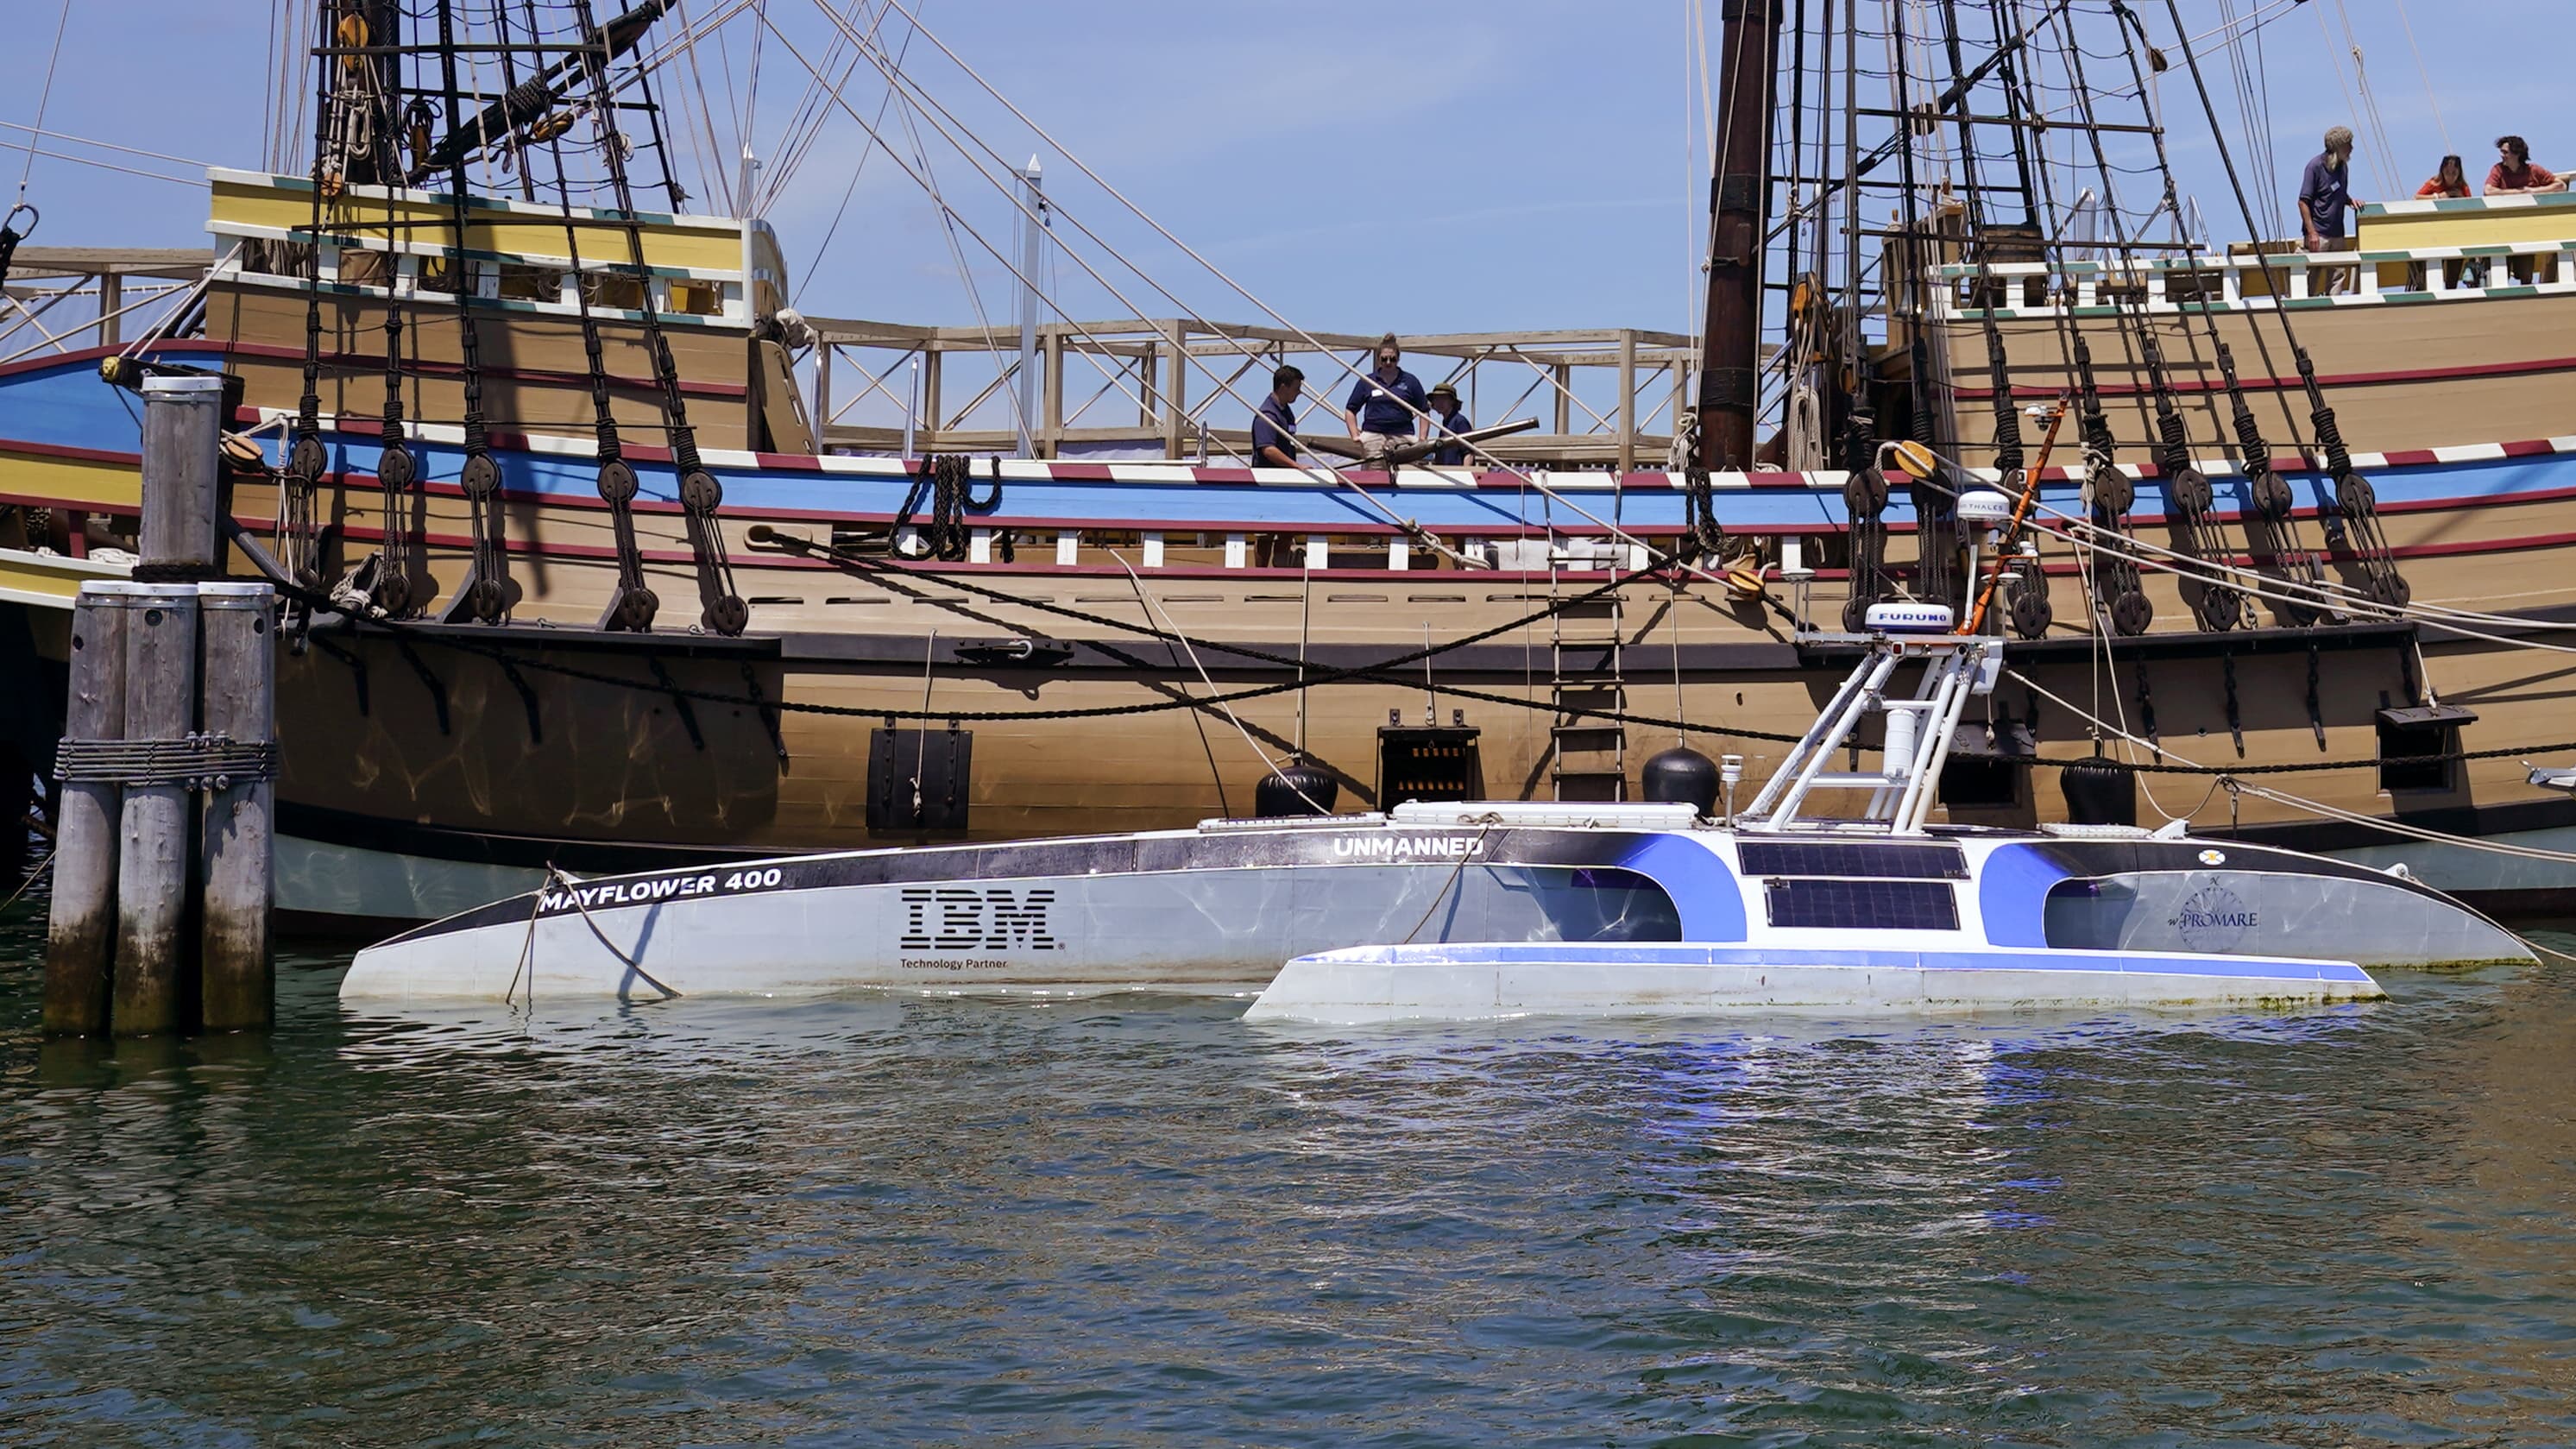 Mayflower Autonomous Ship floats next to the replica of the original Mayflower, June 30, 2022, in Plymouth, Mass. (Charles Krupa/AP)